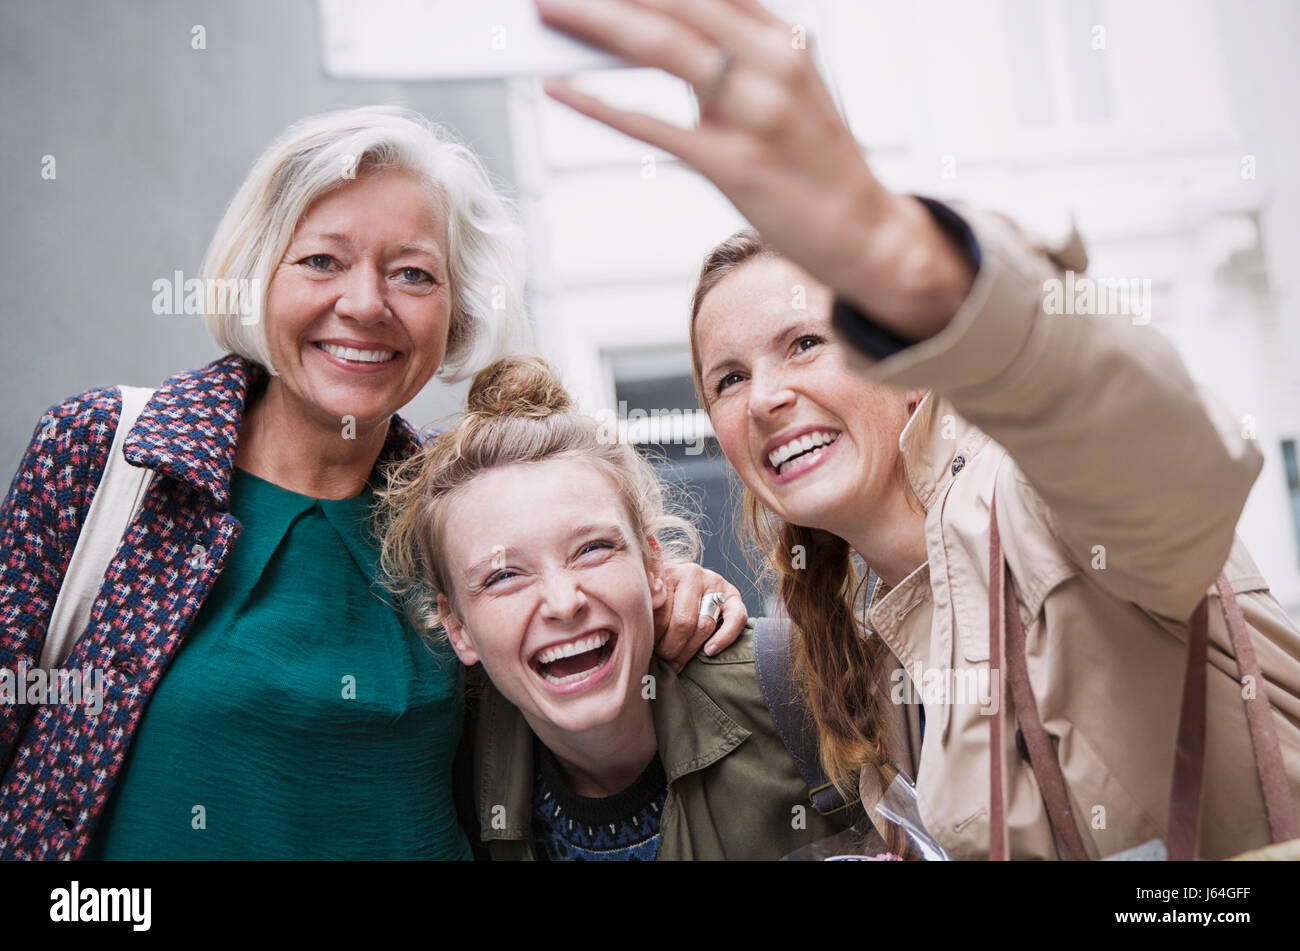 Laughing mother and daughters taking selfie Stock Photo